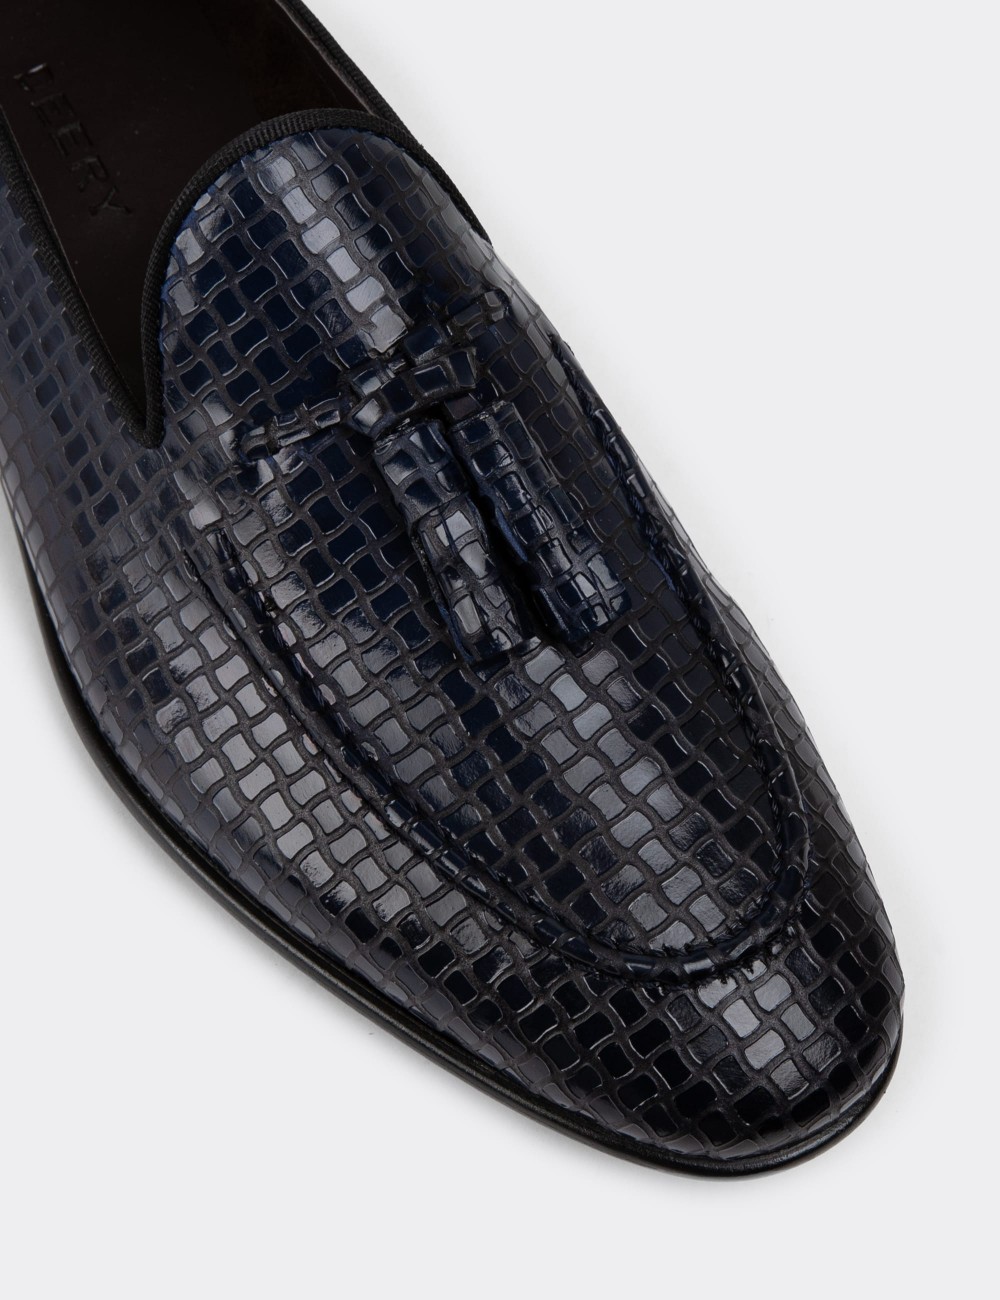 Navy Leather Loafers - 01701MLCVC07